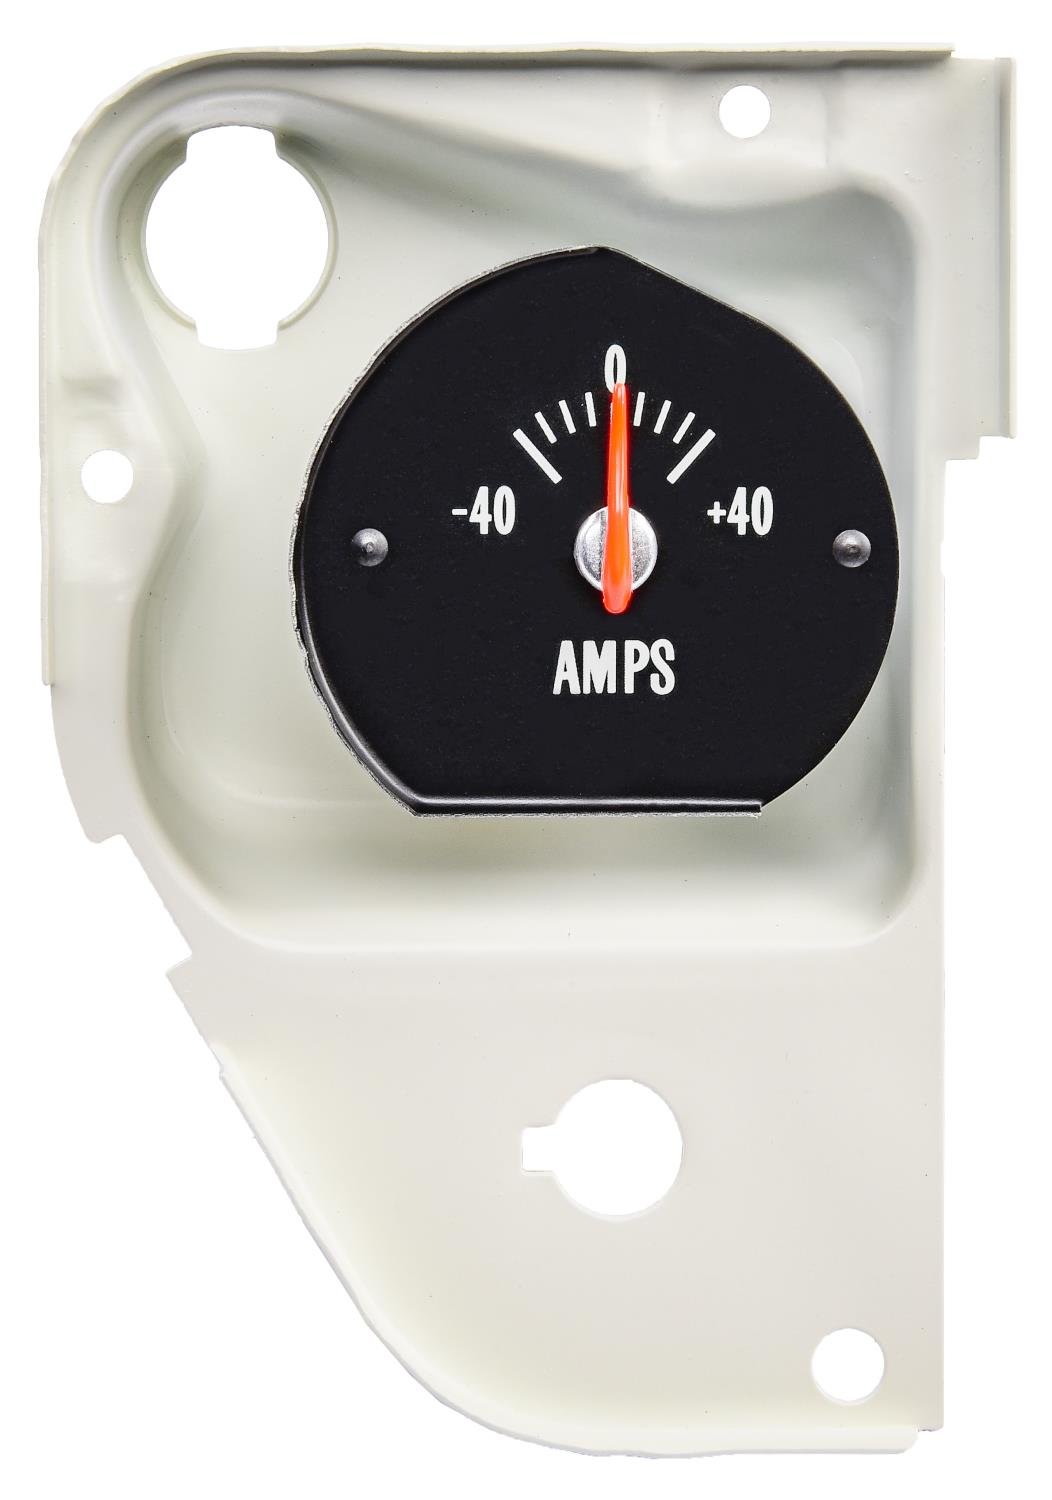 Factory Style Amp Gauge for 1971-1972 Chevrolet Chevelle,